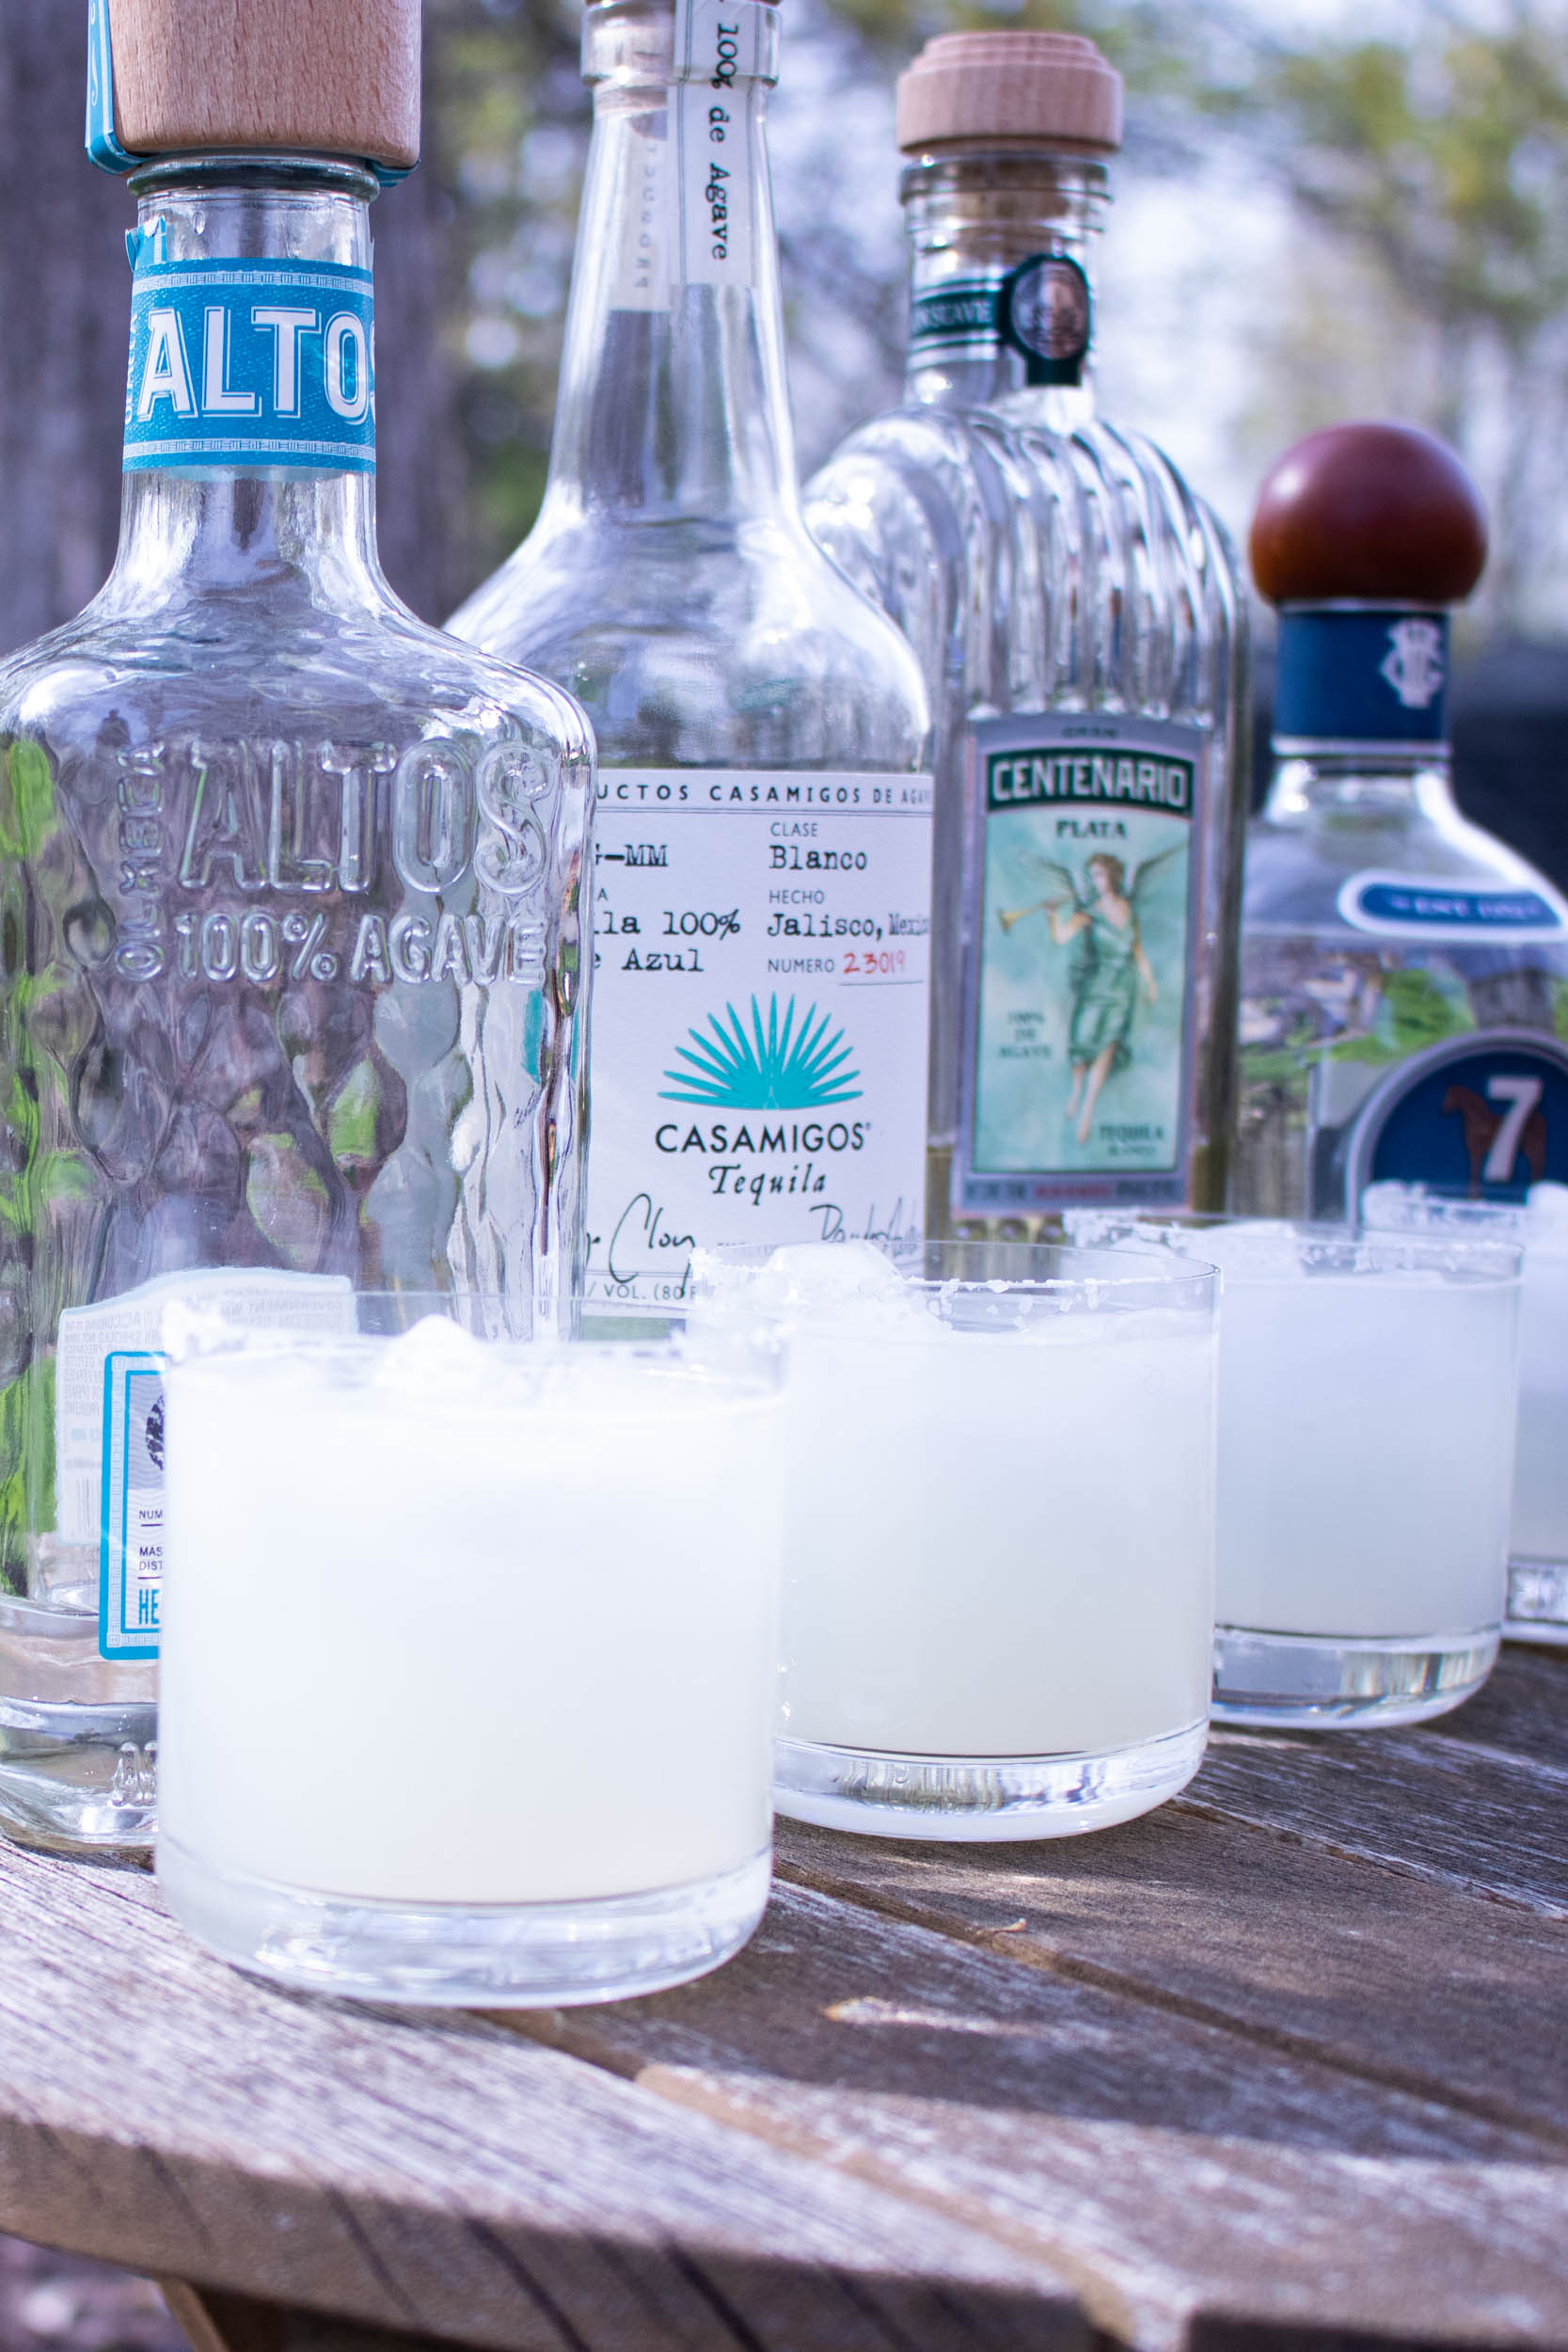 First Pour Cocktails’ 2021 Blanco Tequila Rankings for Cinco De Mayo